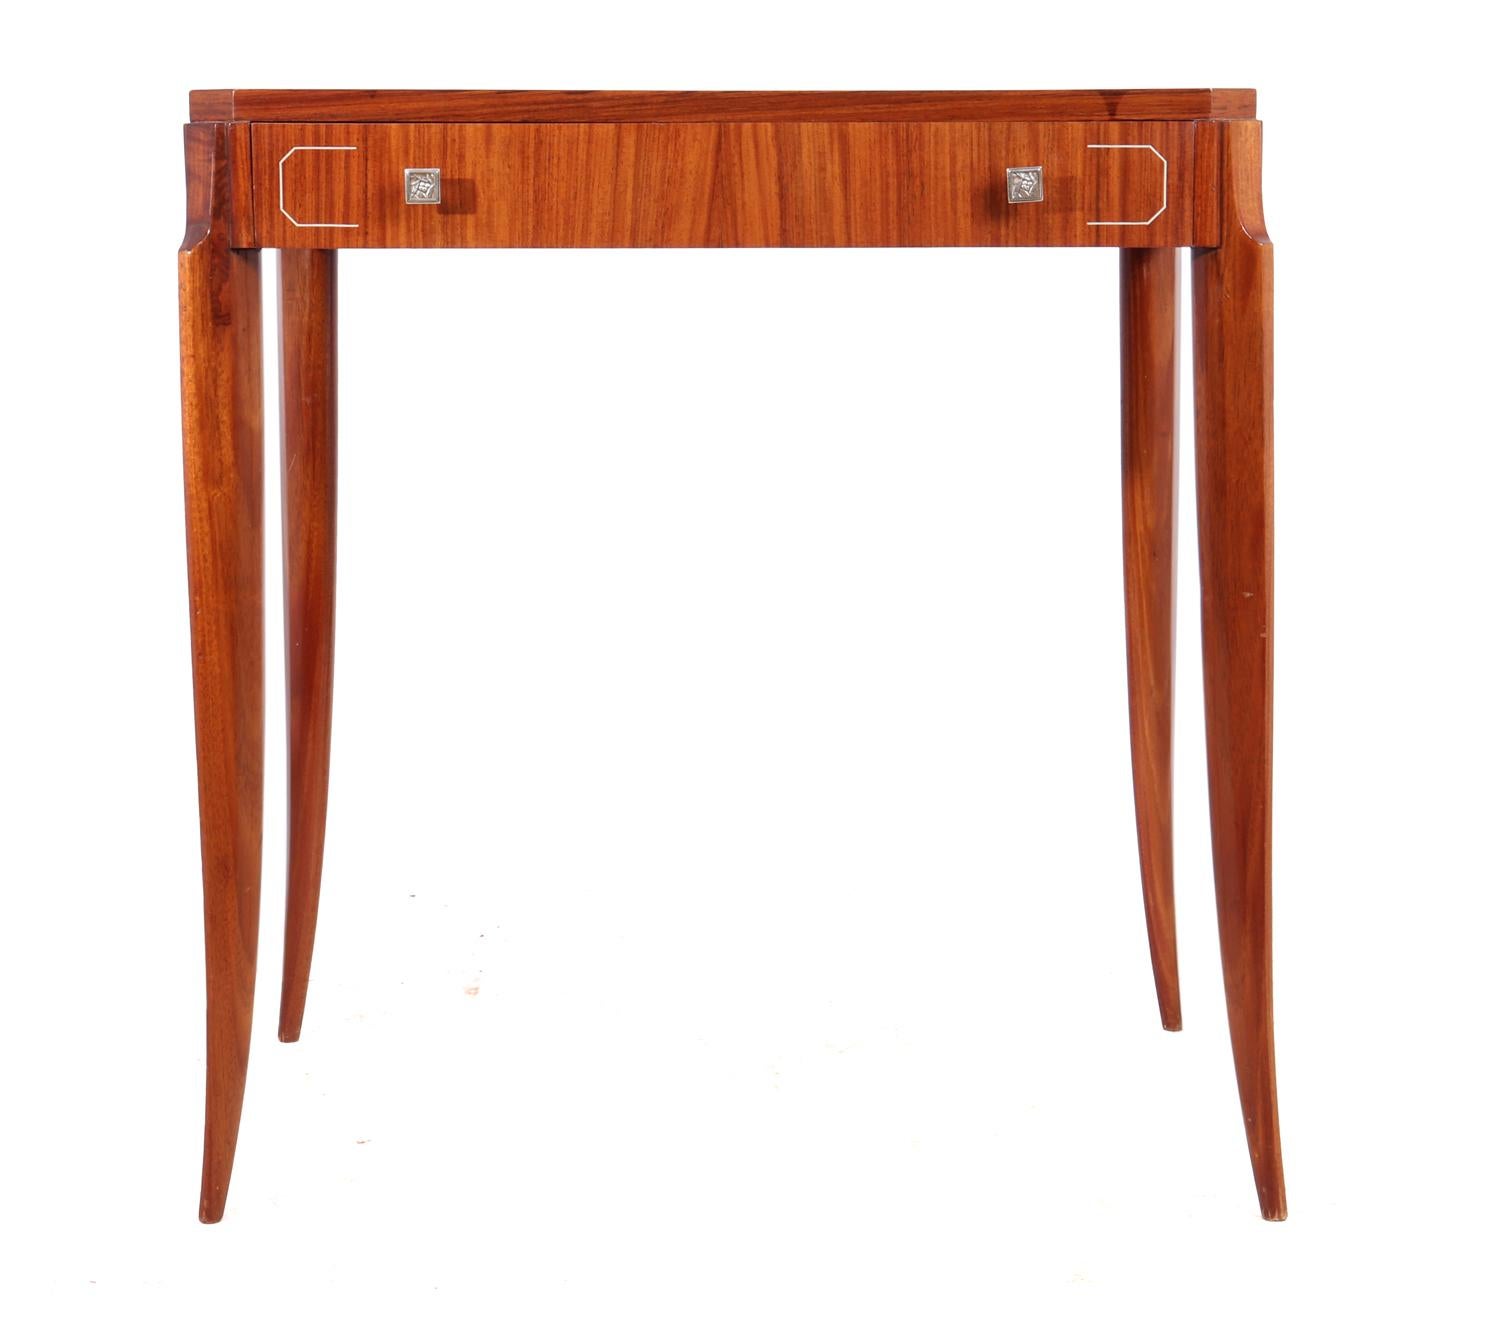 Art Deco rosewood writing table, circa 1920

A super quality Art Deco writing table with single drawer and in excellent condition throughout

Age: 1920

Style: Art Deco

Material: Indian rosewood

Origin: France

Condition: Very